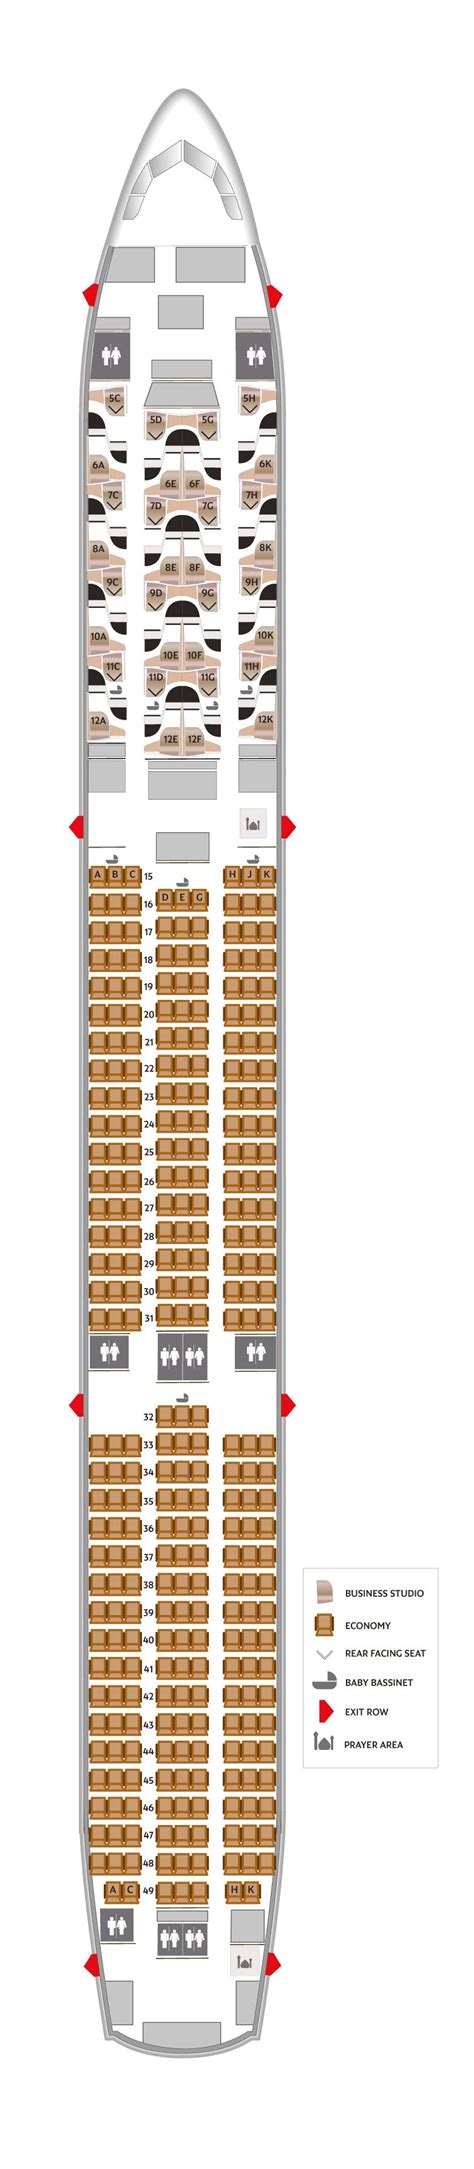 Seat Map And Seating Chart Boeing Dreamliner Etihad Airways Hot